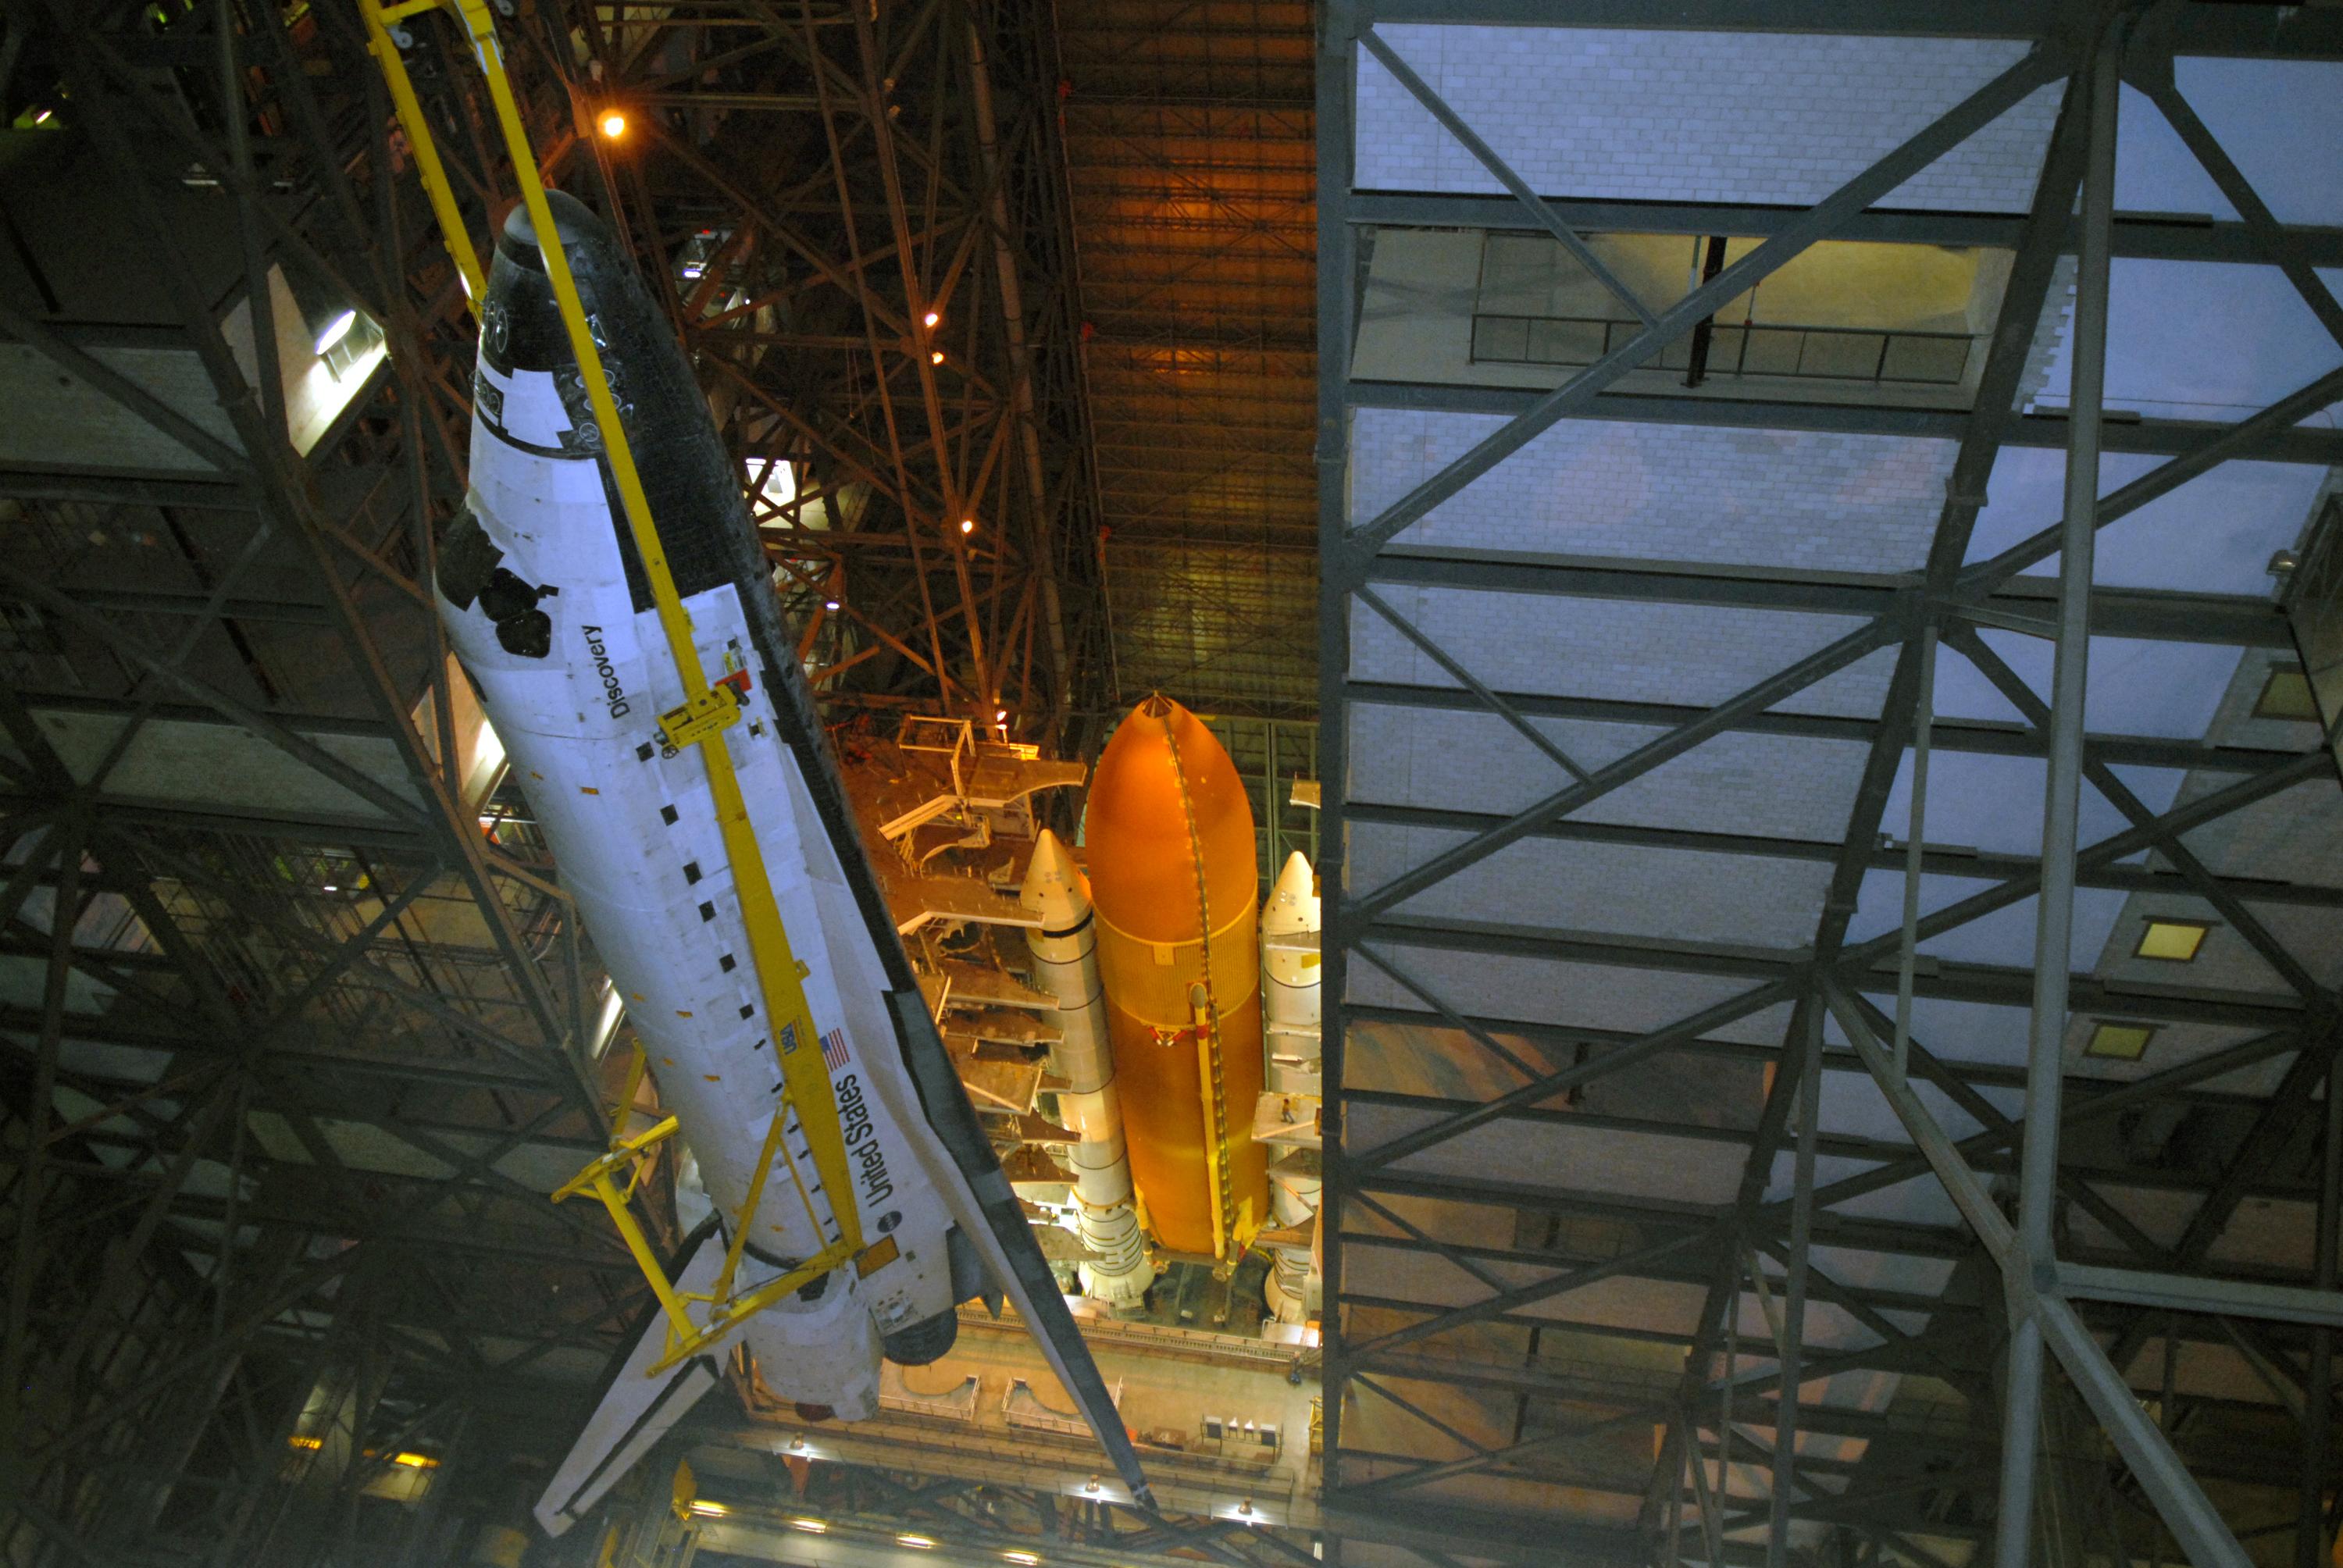 Picture of a space shuttle being prepared for launch.